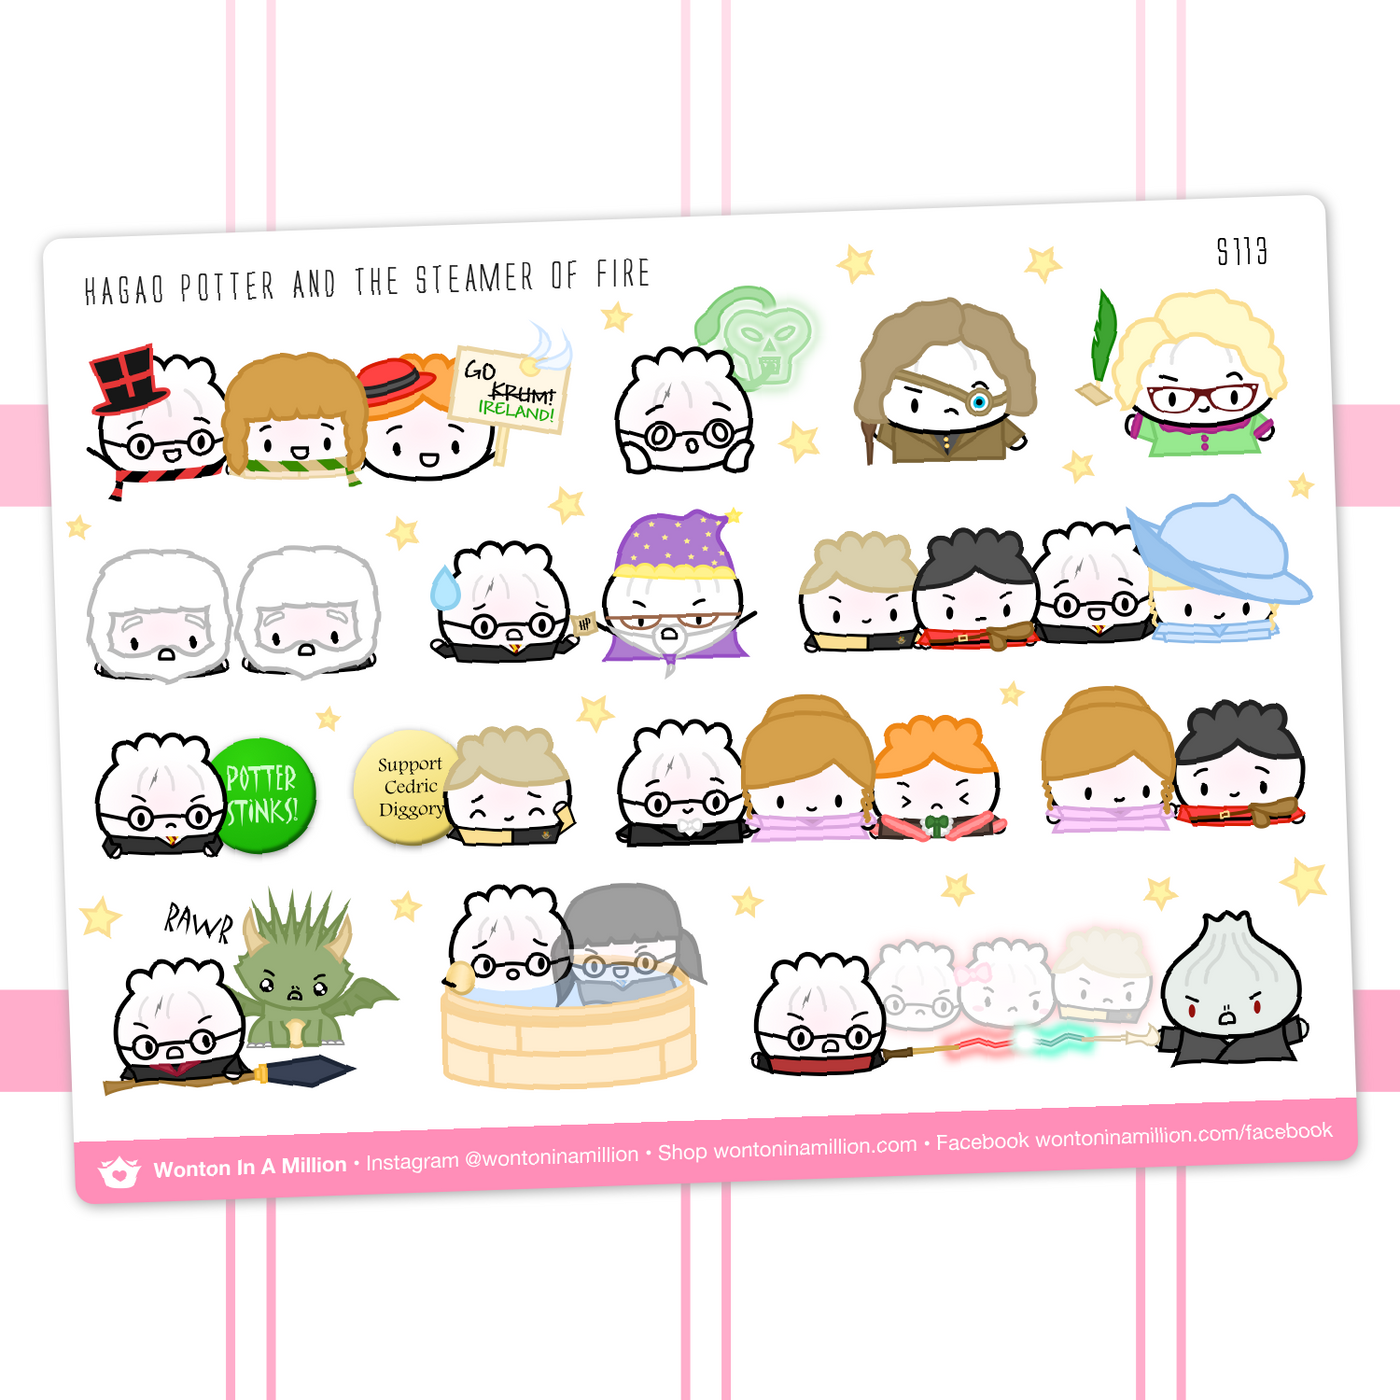 S113 | Hagao Potter [Book 4] - "The Steamer Of Fire" Stickers